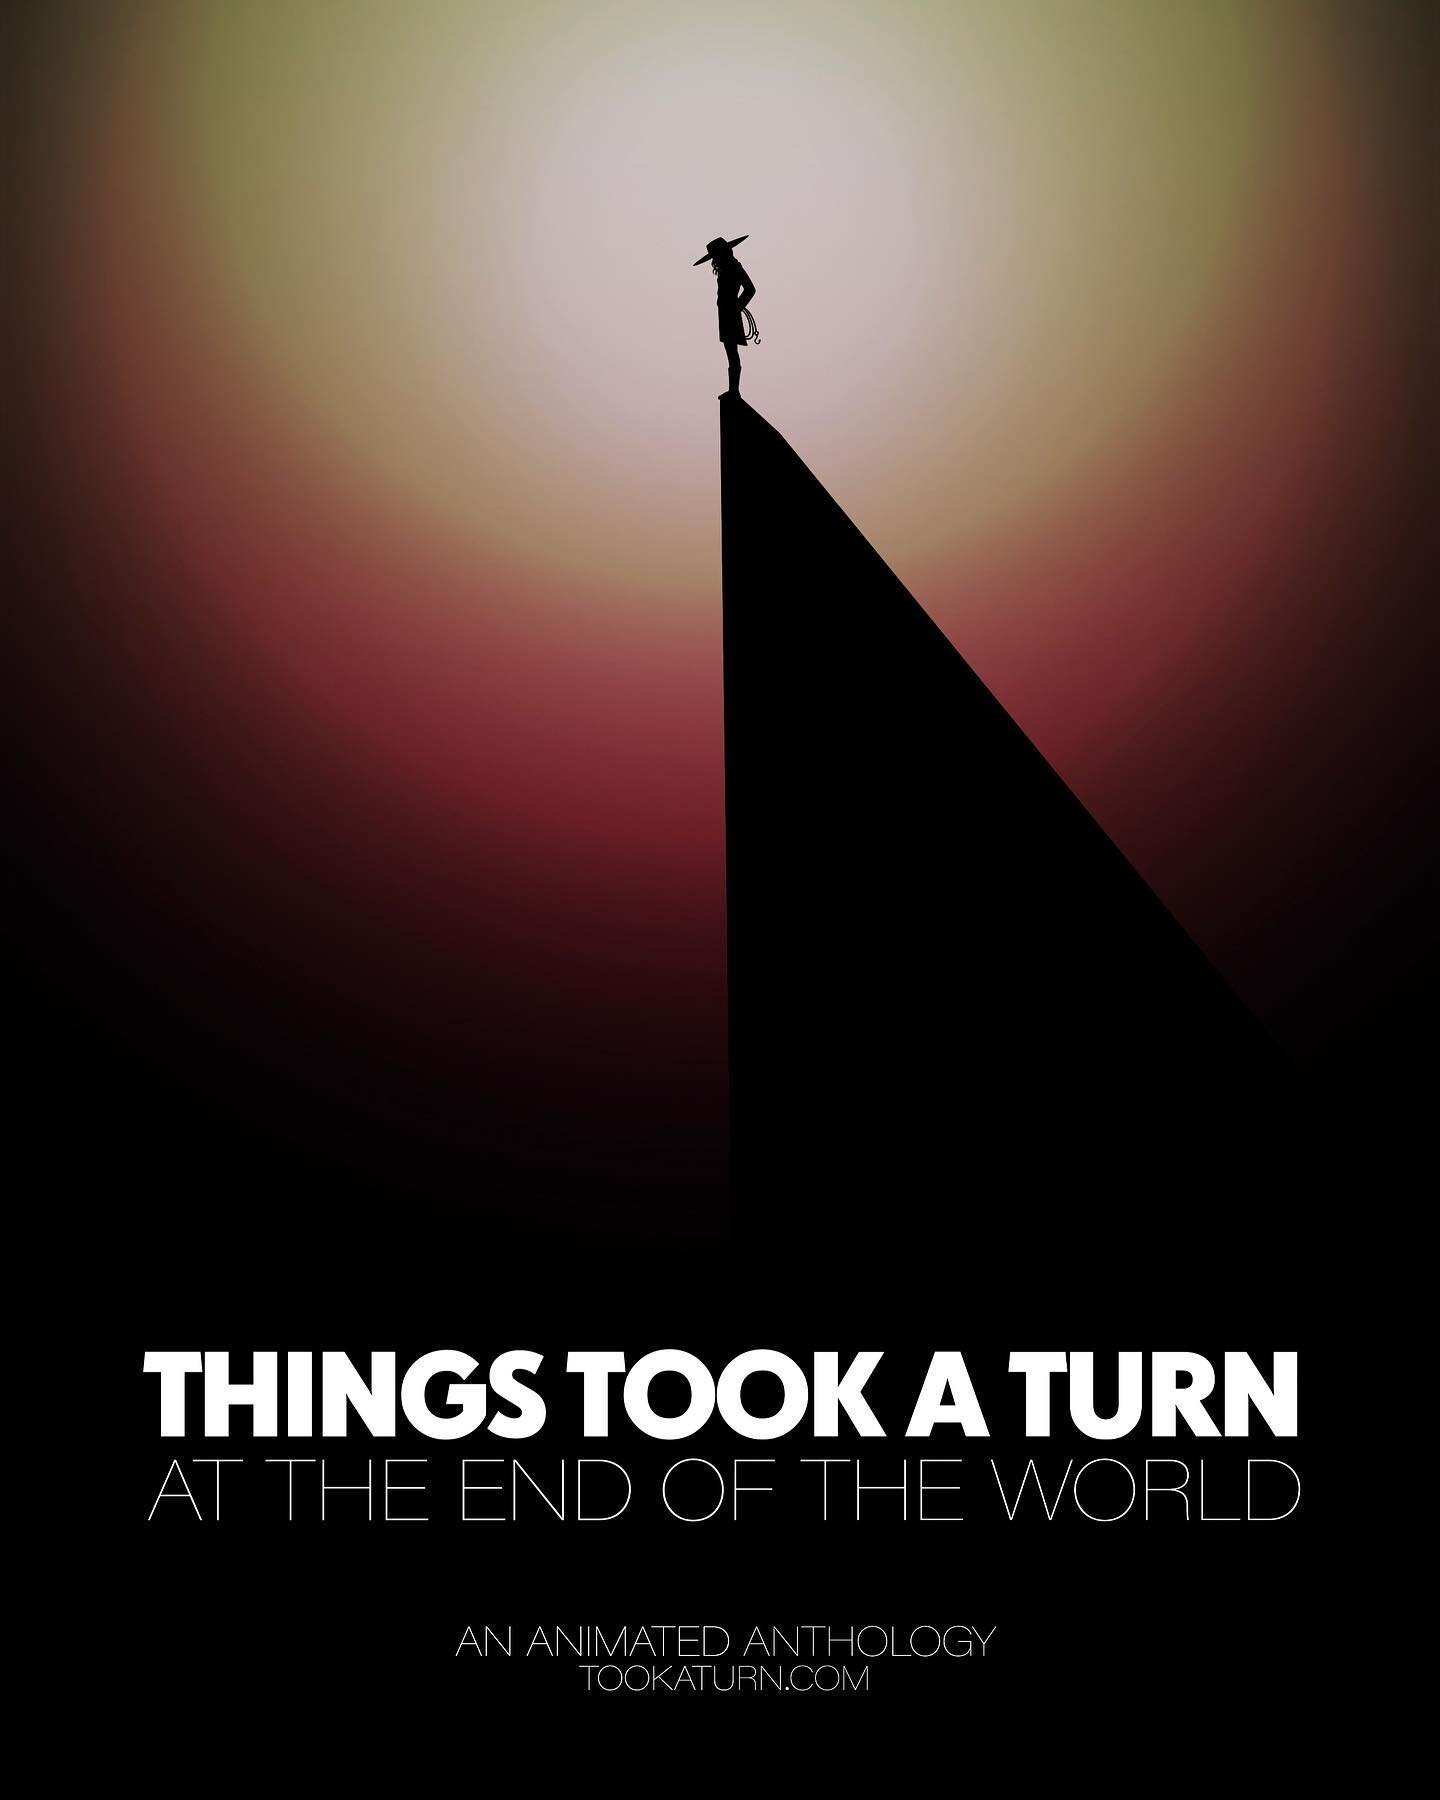 Repost @thngstookaturn 

Signups are now open for this year's anthology Things Took a Turn: At the End of the World! This will be about endings, but what is an ending if not a new beginning?

Things Took a Turn is an animation anthology that challeng